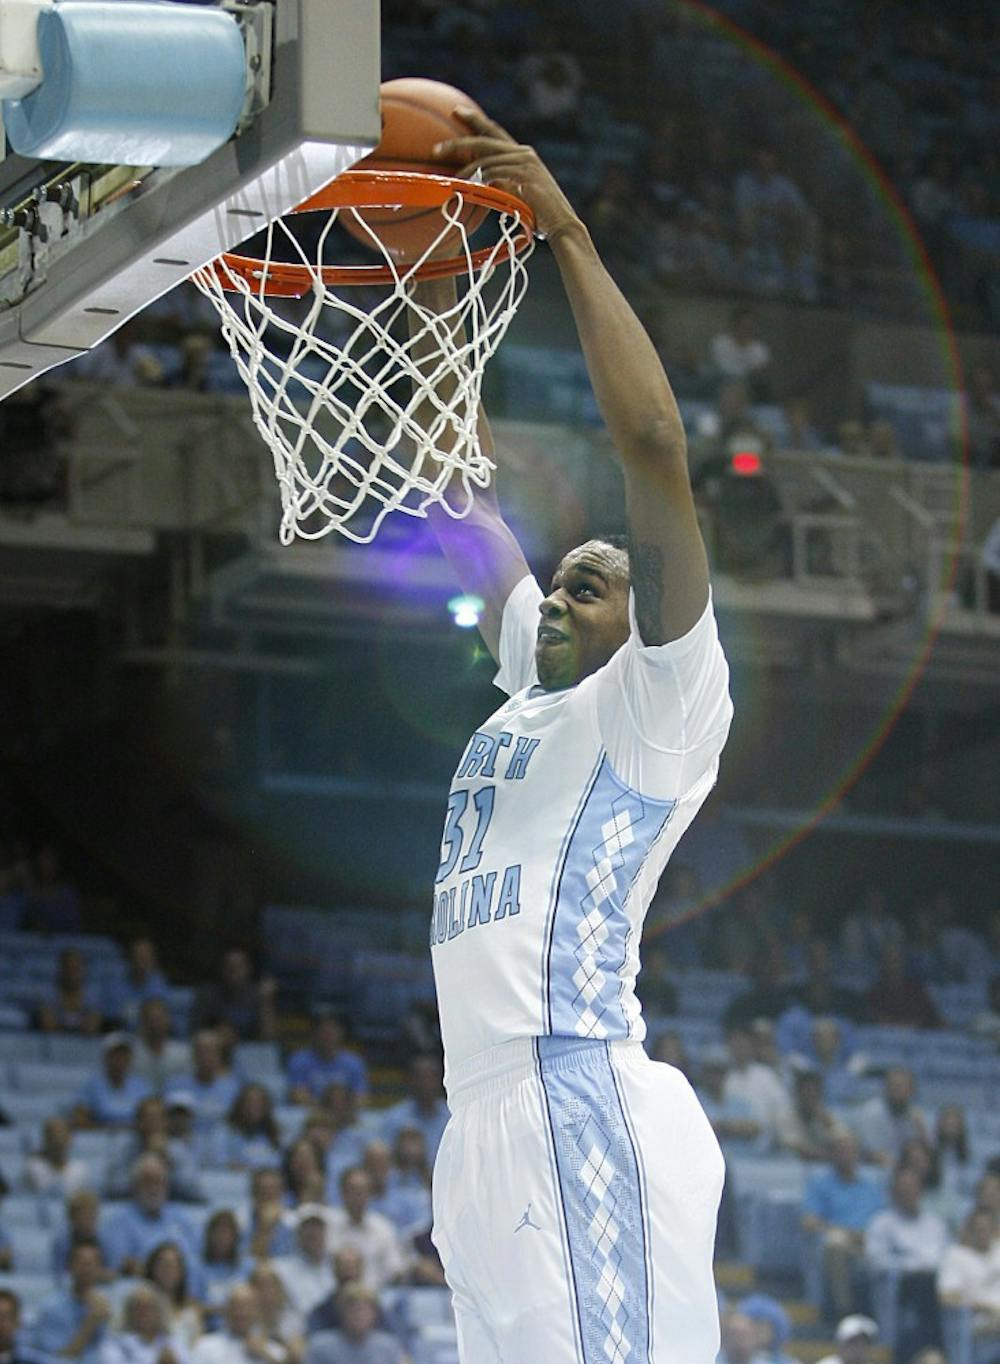 UNC forward John Henson dunks the ball during the first half of the game. Henson had 16 points in the Carolina win over Tennessee State.